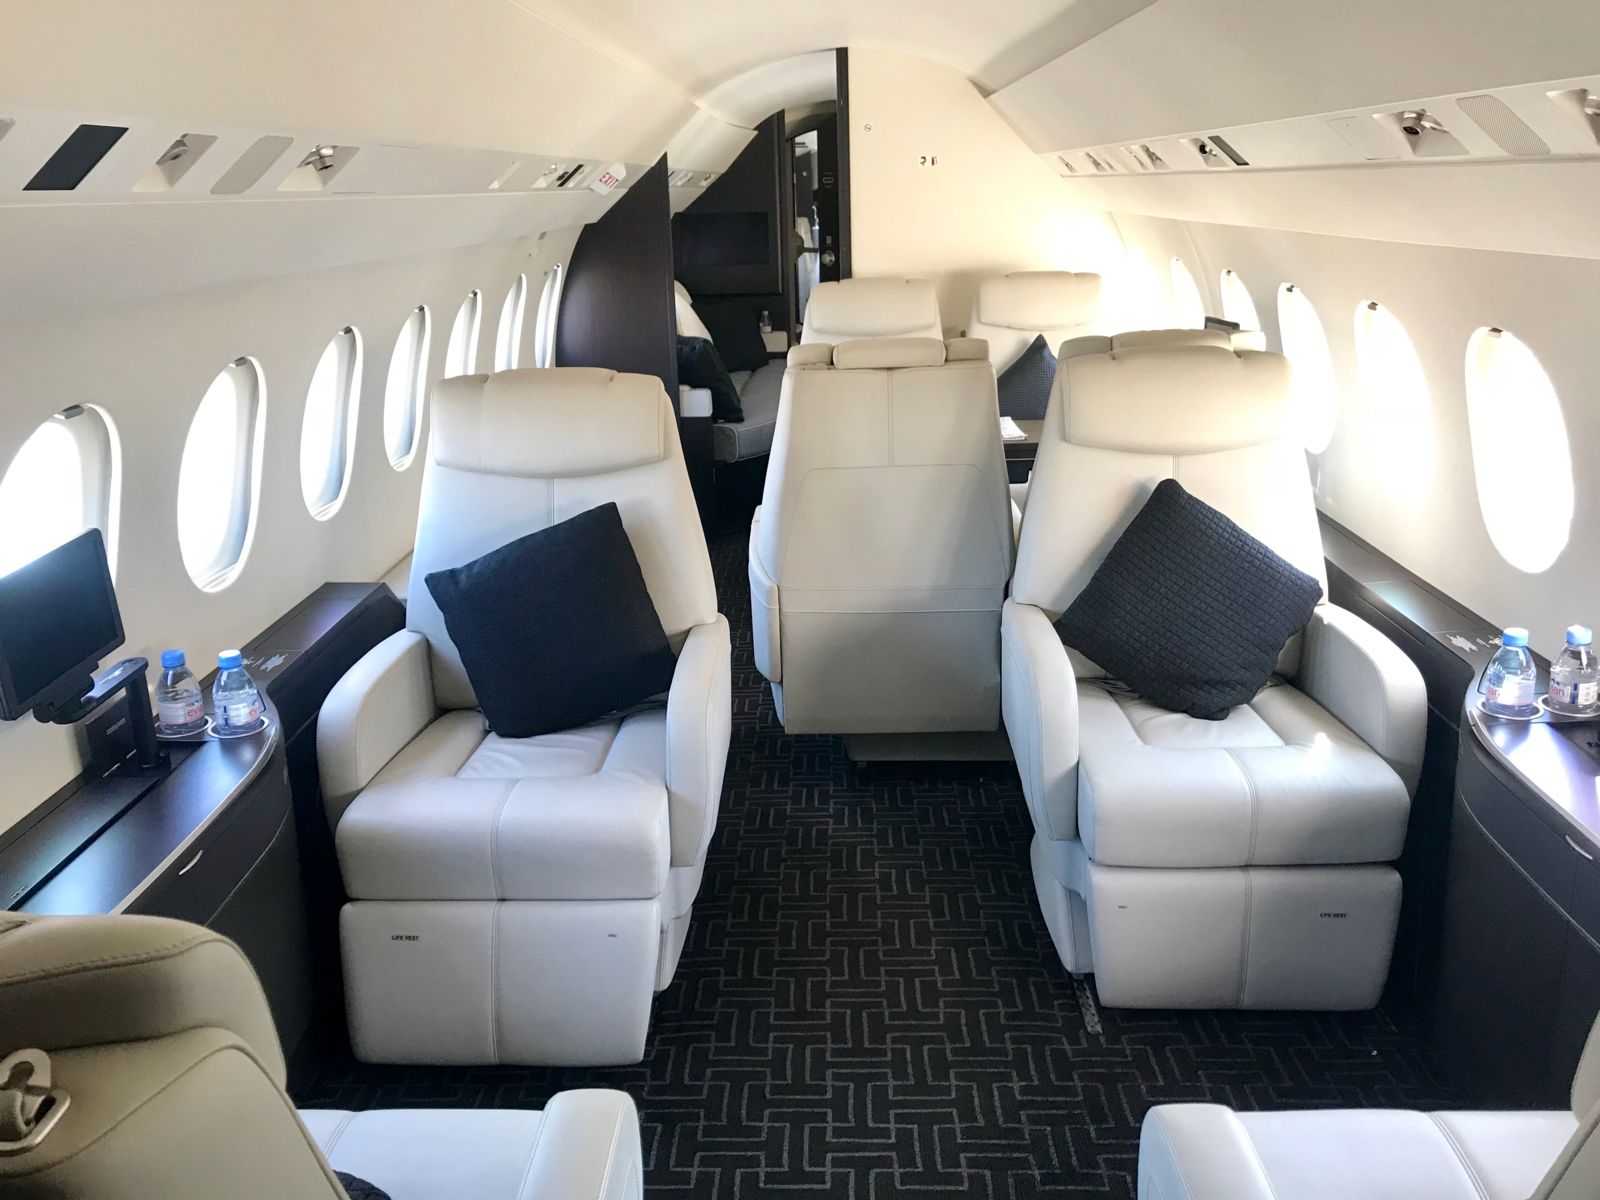 Dassault Falcon 900LX  S/N 288 for sale | gallery image: /userfiles/images/F900LX%20SN%20288/cabin%201.jpg